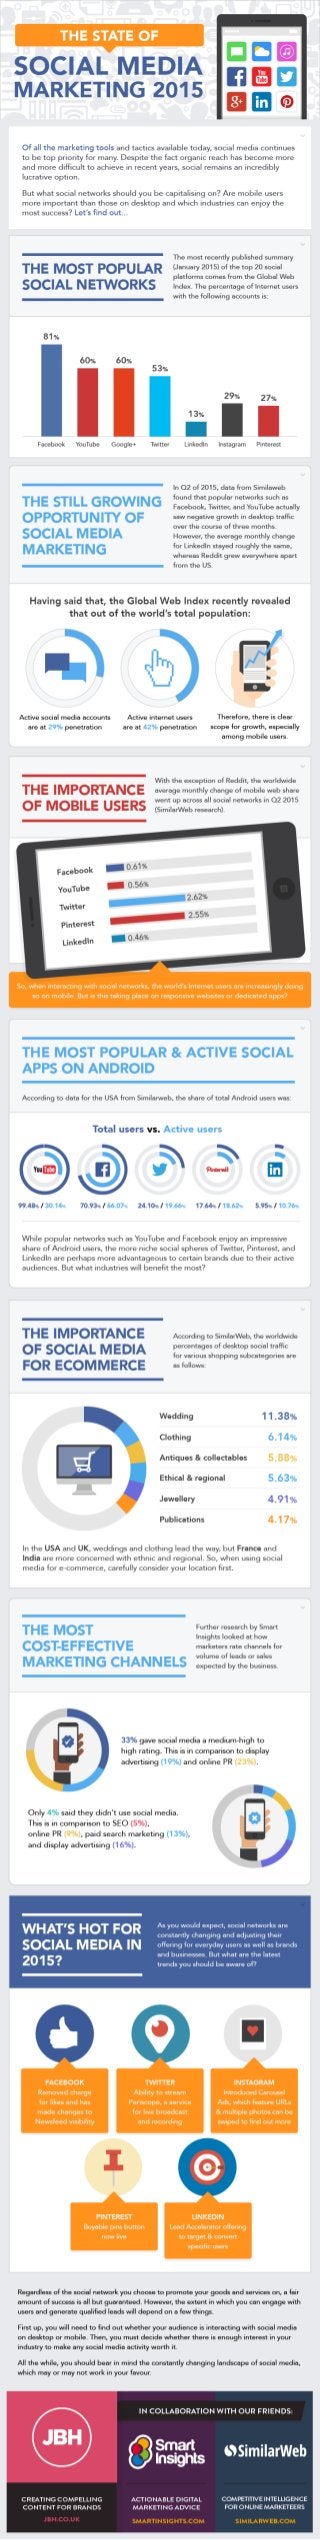 The State of Social Media Marketing 2015 By Infographic